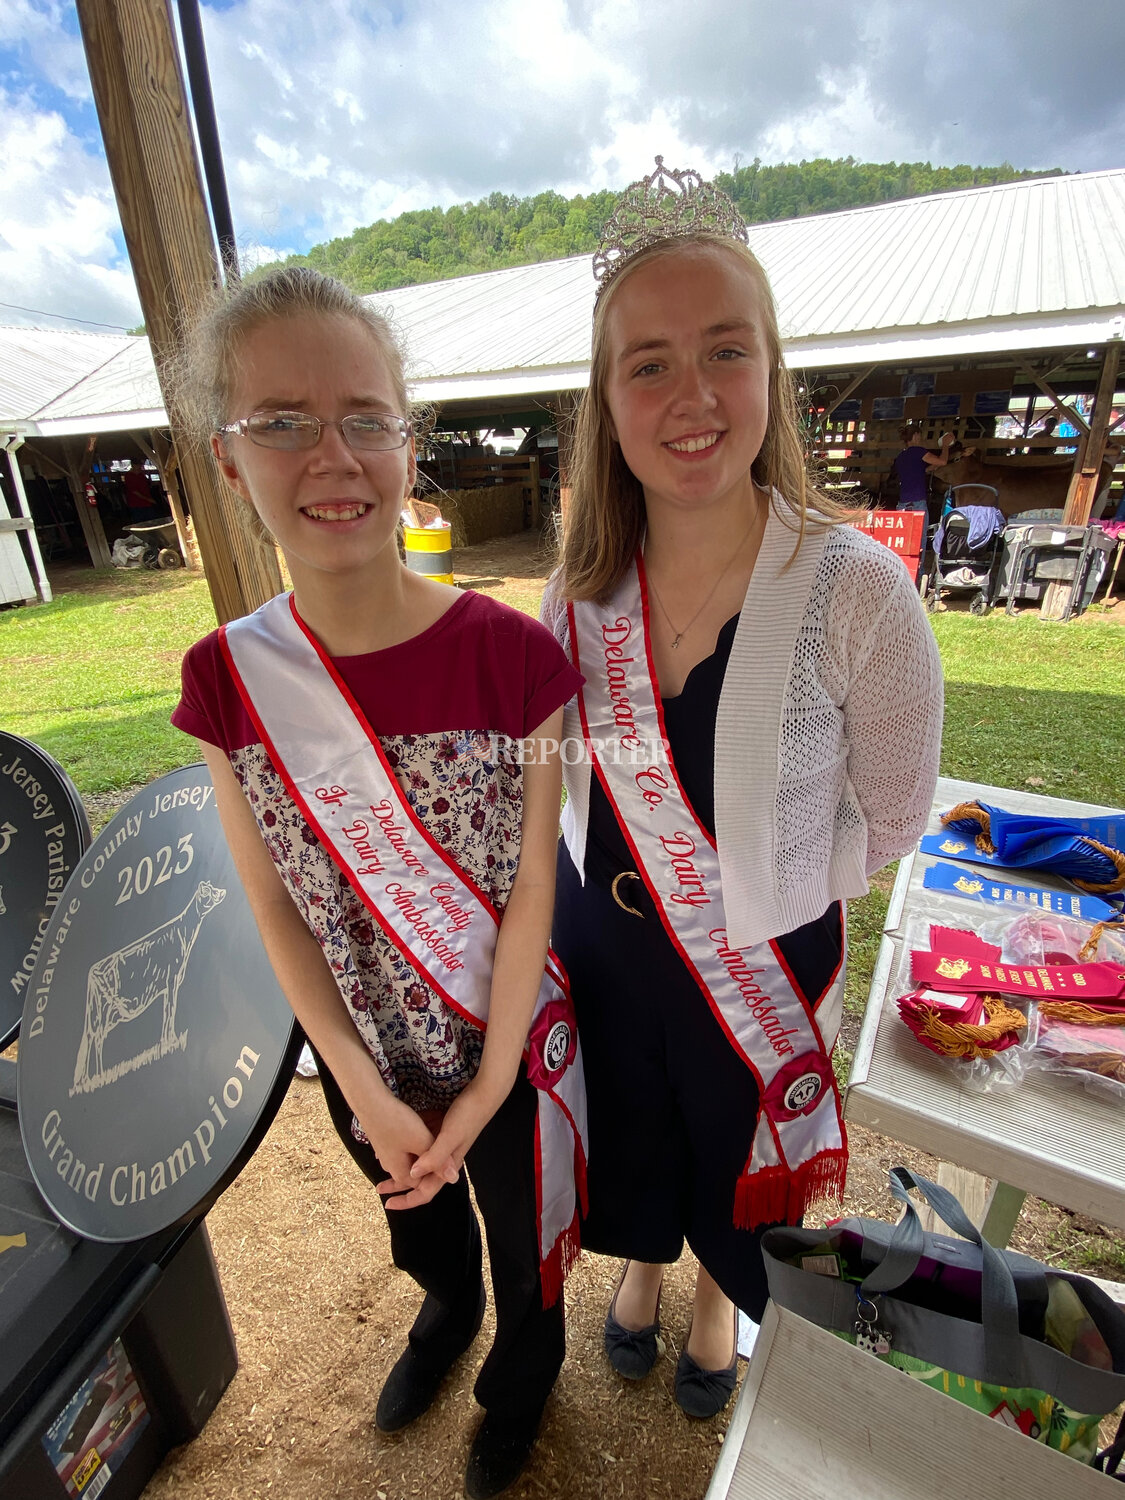 The 2022-23 Dairy Ambassador Jessica Coleman and Junior Dairy Ambassador Angela Cerosaletti present ribbons at Sunday’s open Jersey Parish Show at the Delaware County Fair.